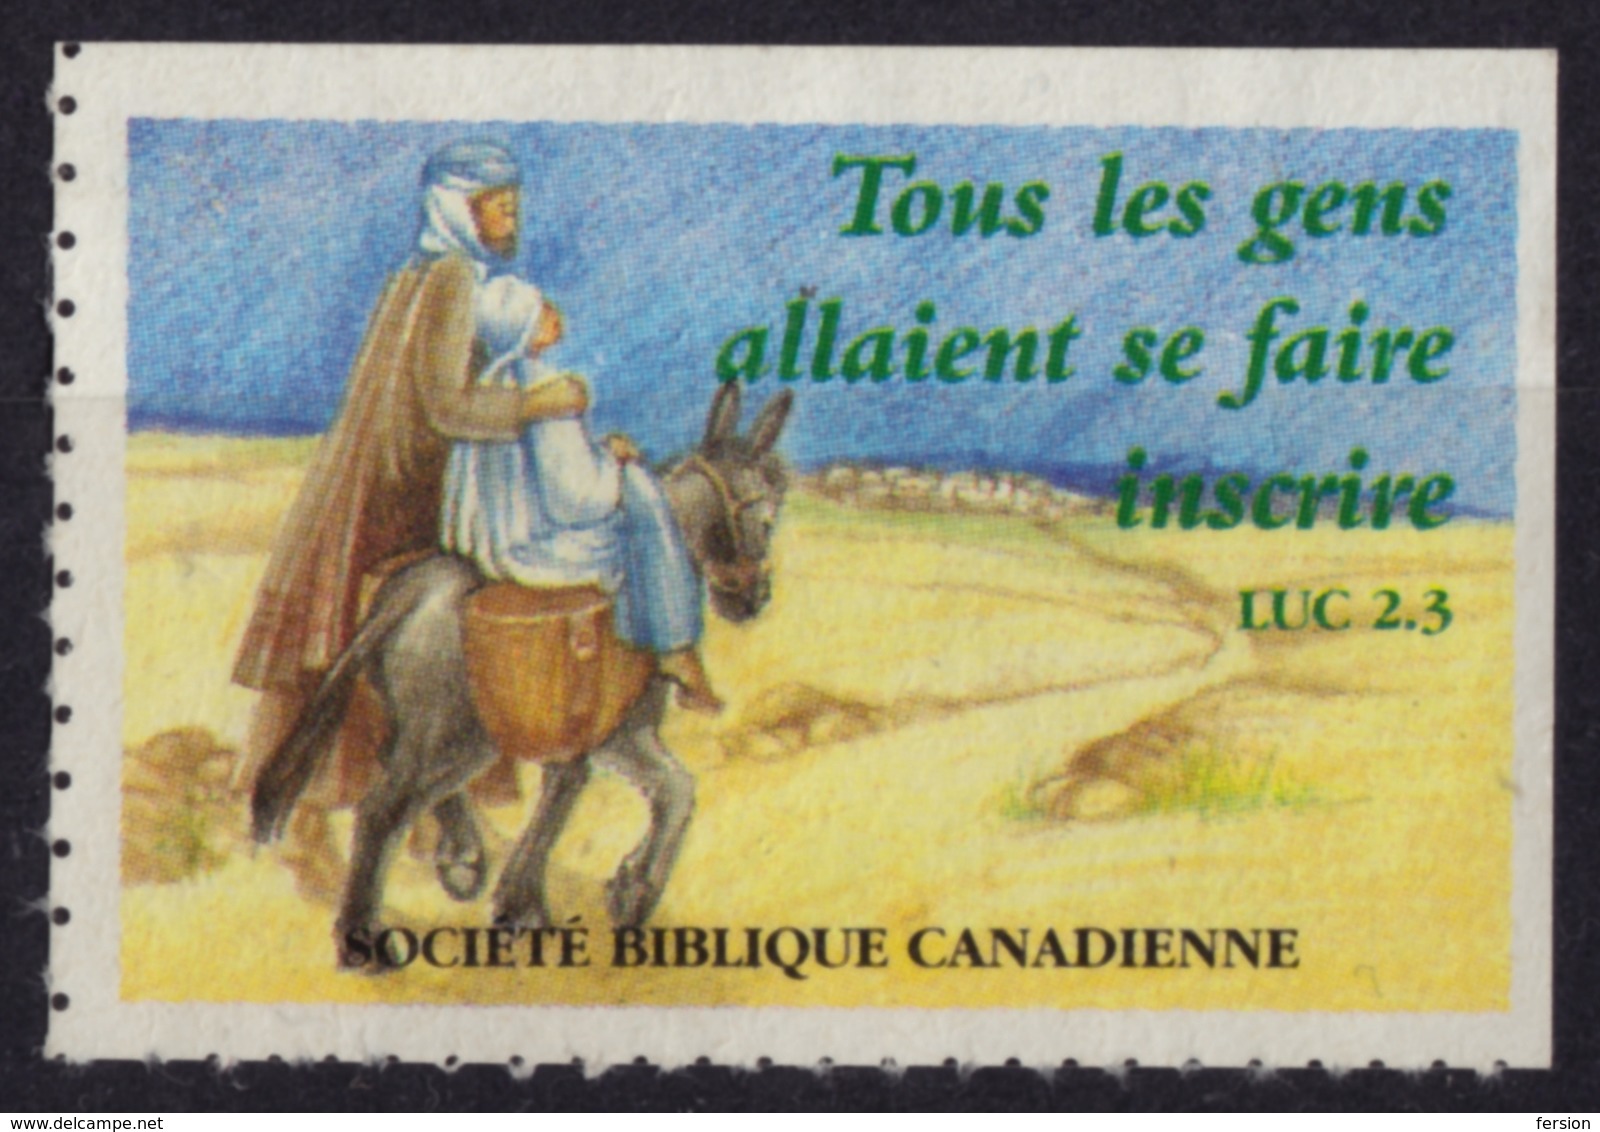 CANADA Bible Society / Christianity - Charity Stamp / Label / Cinderella / Vignette  - Used - Mary Joseph Donkey - Esel